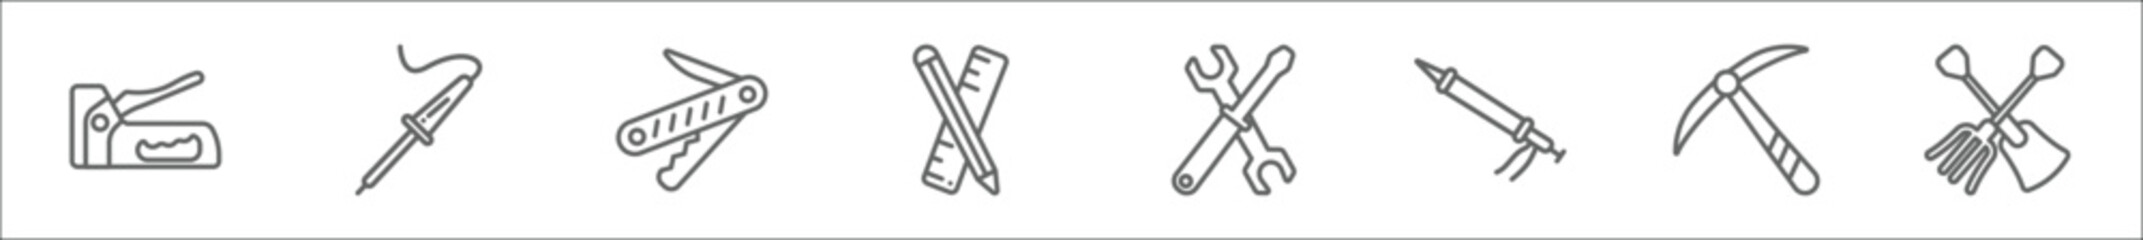 outline set of construction and tools line icons. linear vector icons such as staple gun, solder, jackknife, pencil and ruler, improvement, sealant gun, pickaxe, shovel and fork